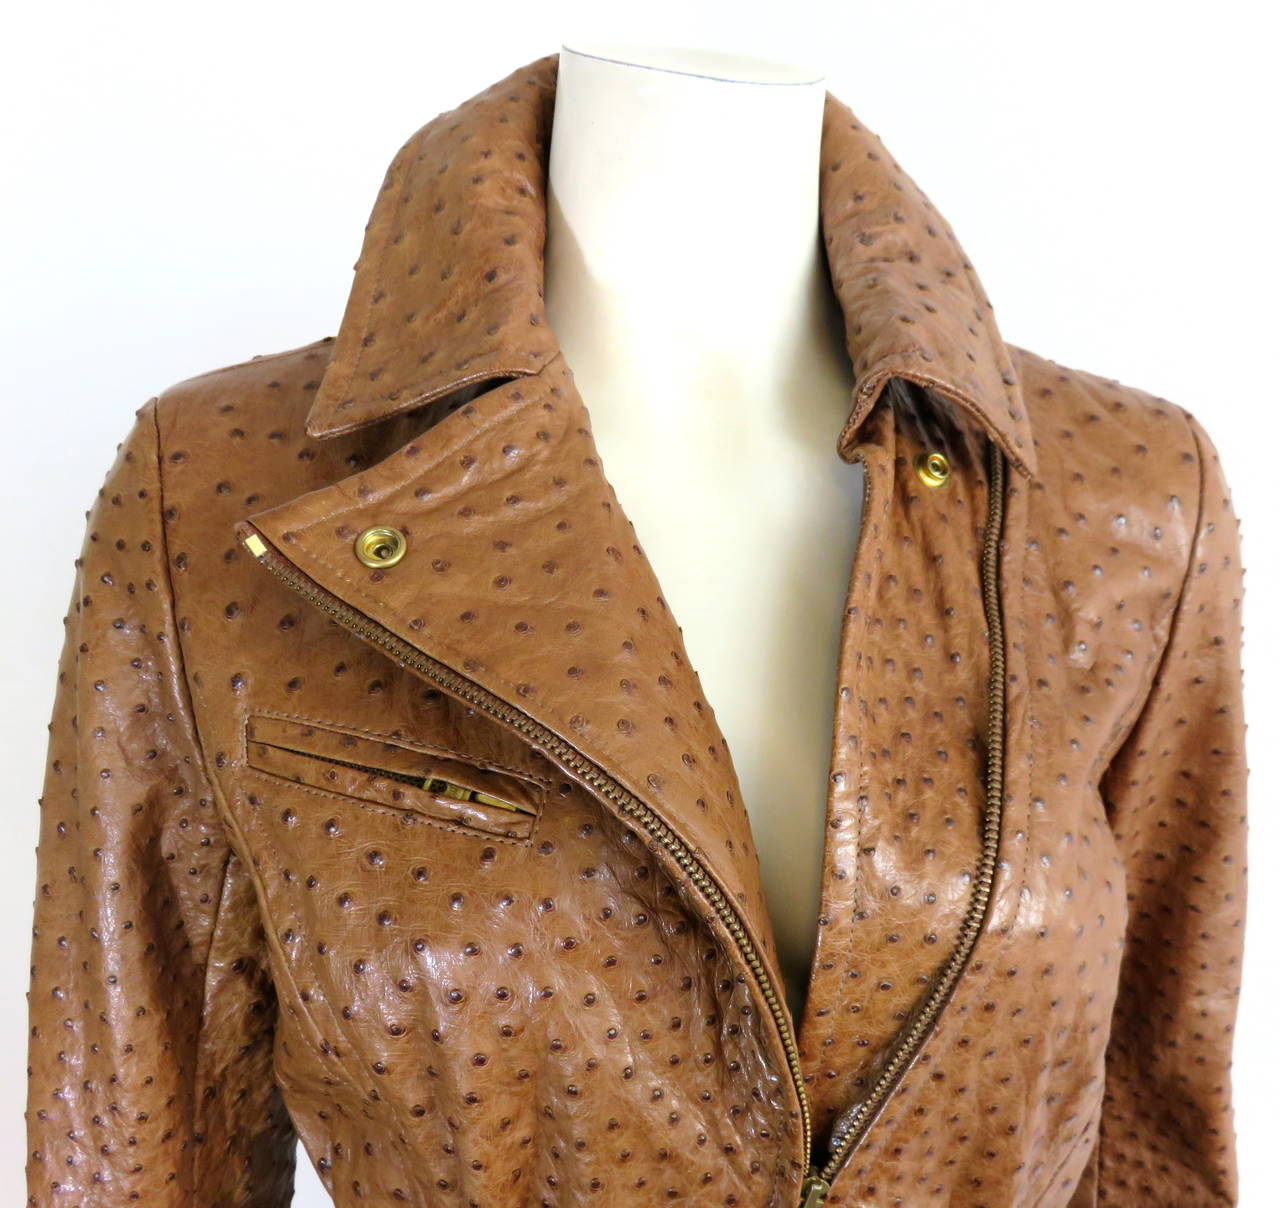 Worn only once, 1980's HERMES PARIS Cognac ostrich 'full-quill' leather jacket & pant set.

This amazing jacket & pant set is completely made of luxurious, 'full-quill', ostrich leather in a rich, cognac color.  

This luxurious,